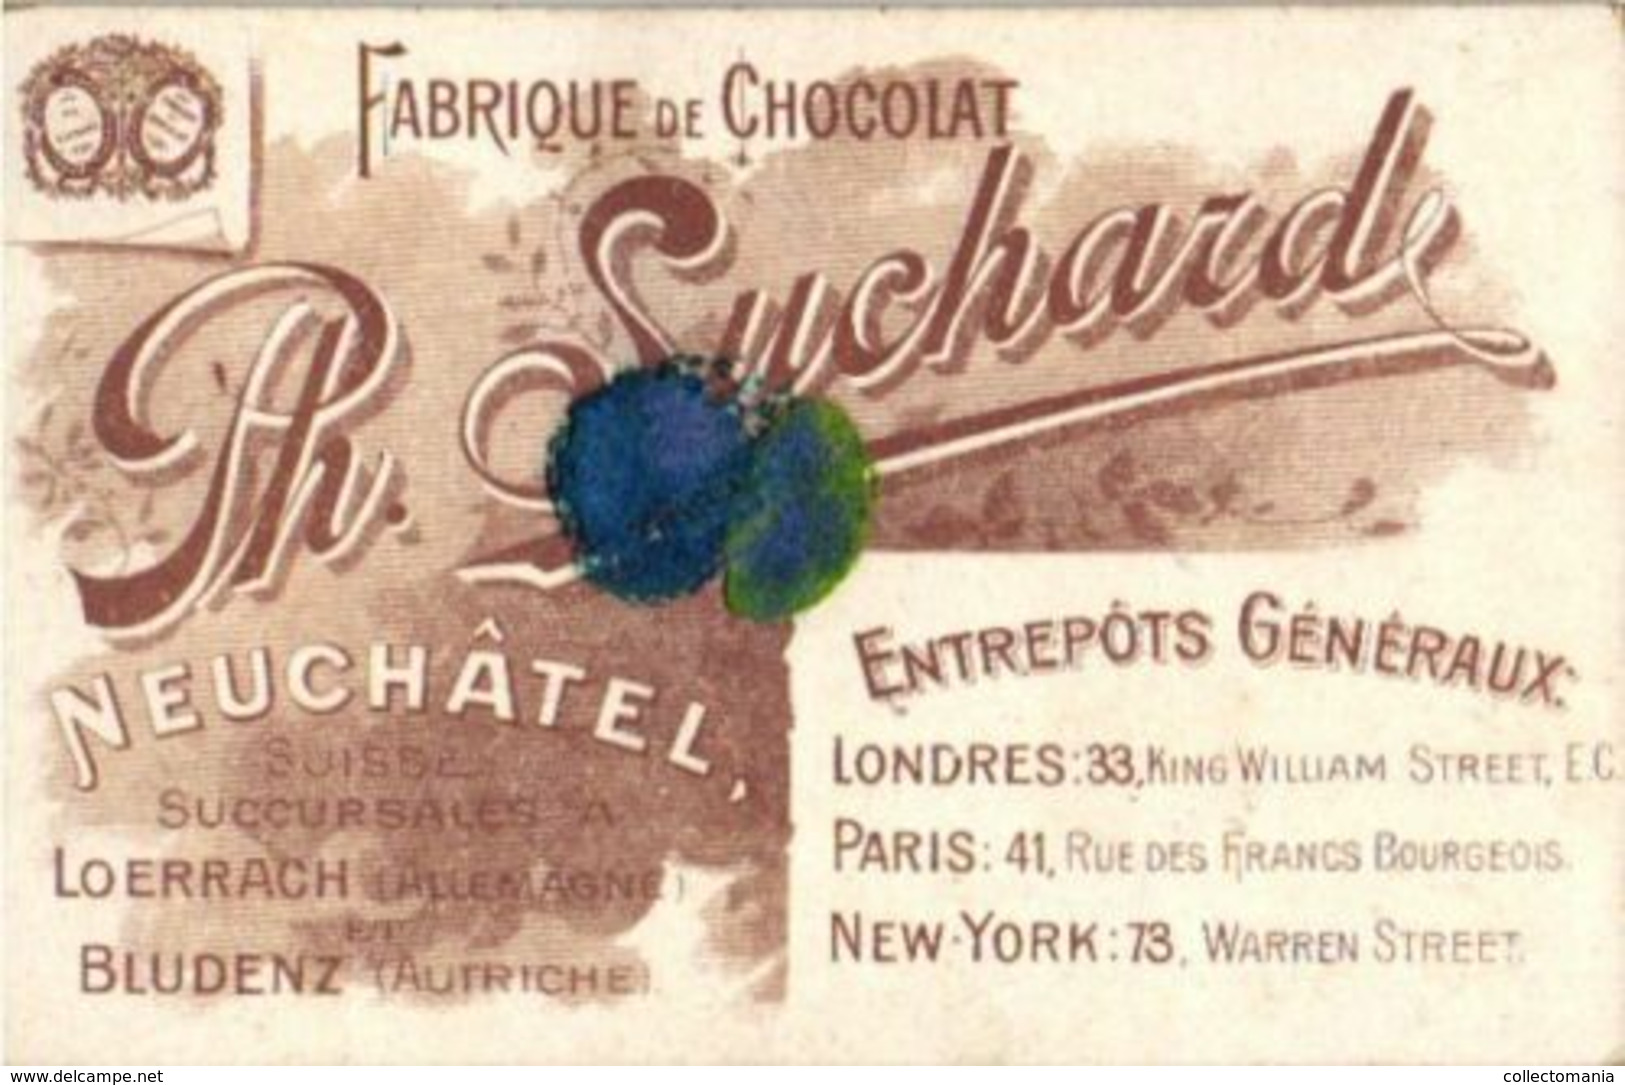 6 chromo litho cards advertising Swiss chocolate SUCHARD set68A c1898 Circus Scenes Pigs Clowns horses manege